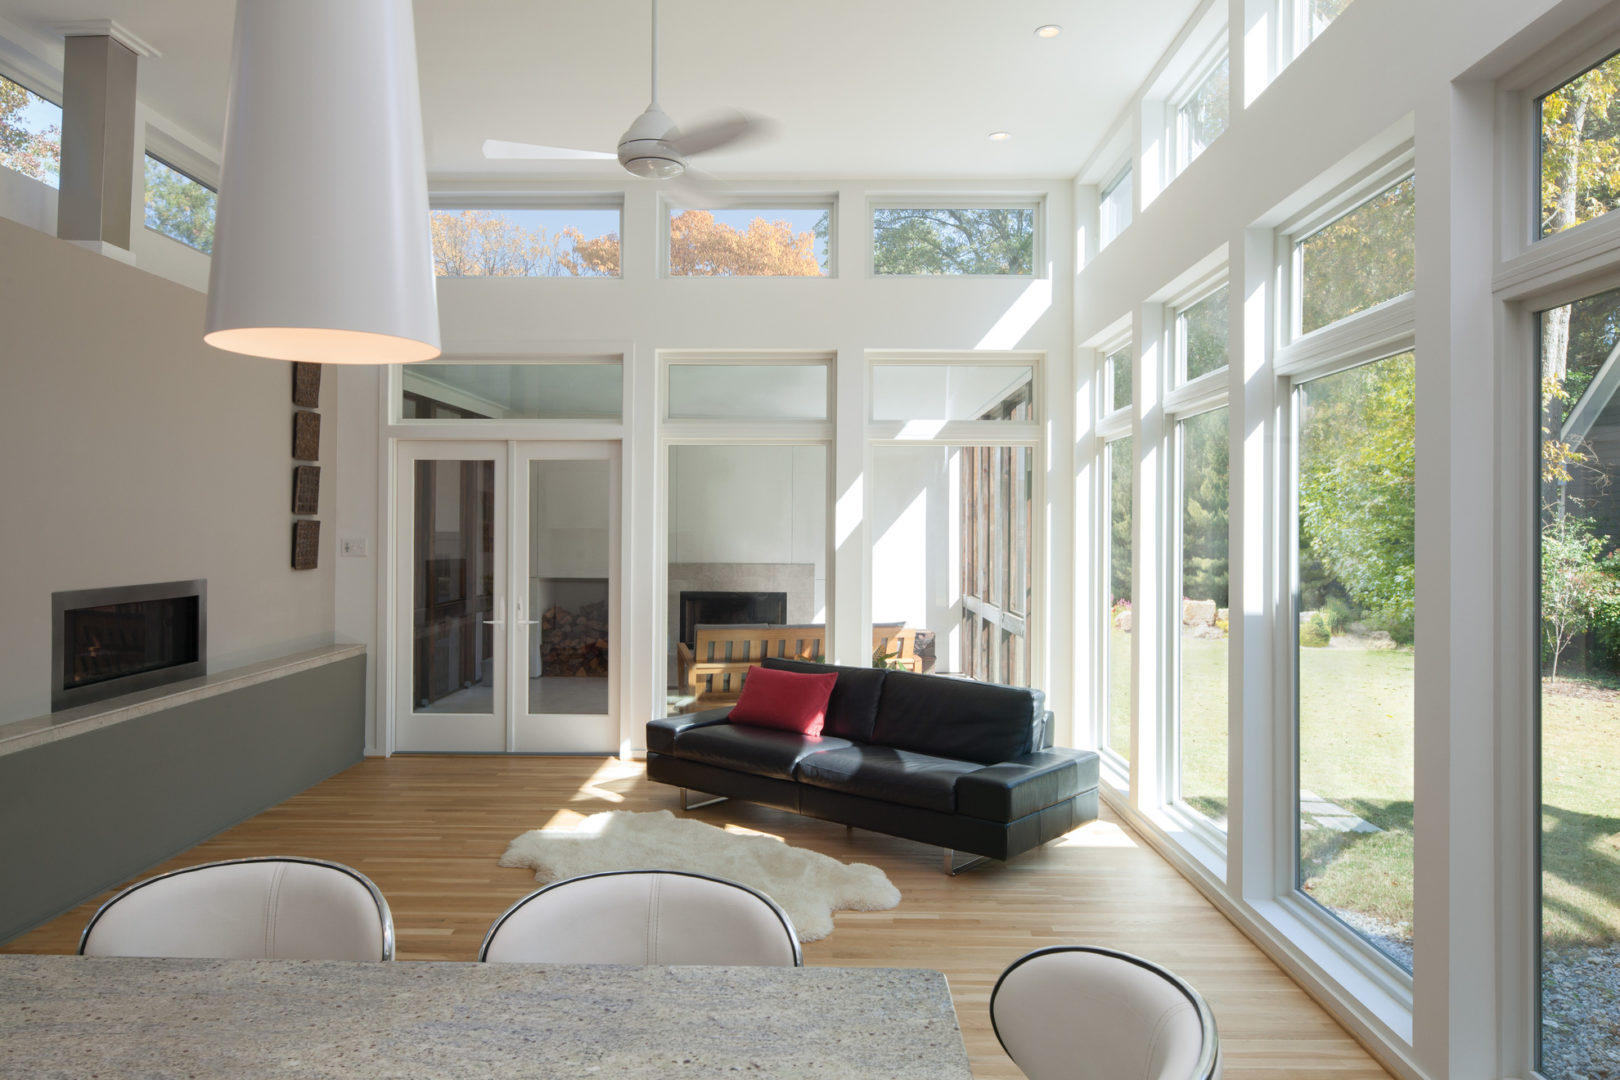 Living room with vaulted ceiling, wood flooring, and large energy-efficient windows overlooking scenic yard.